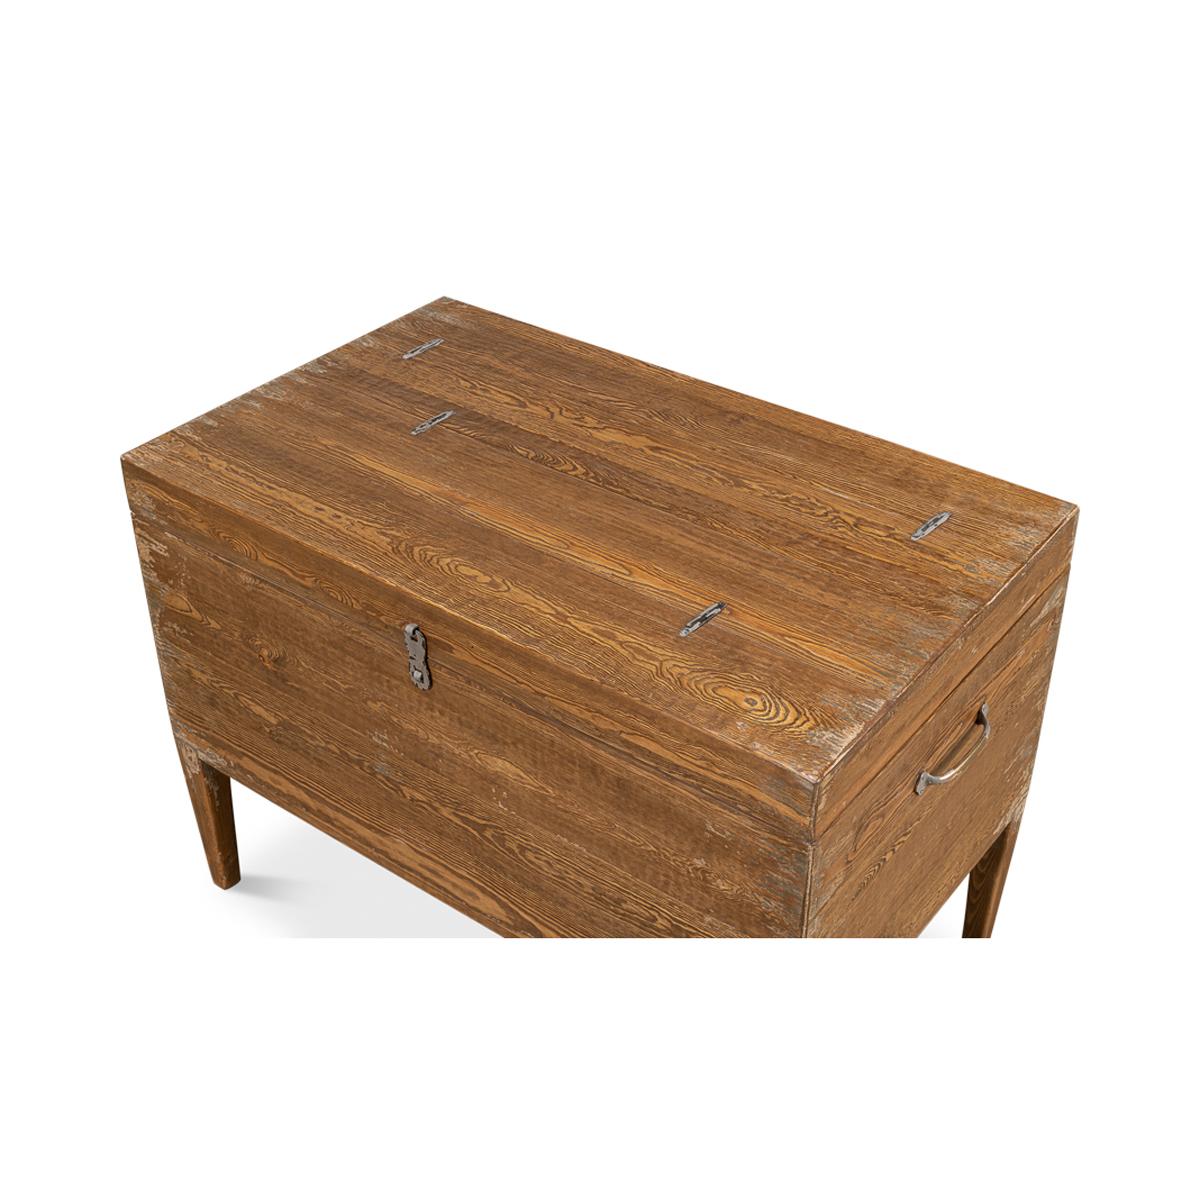 Wood Rustic Pine Trunk Table For Sale